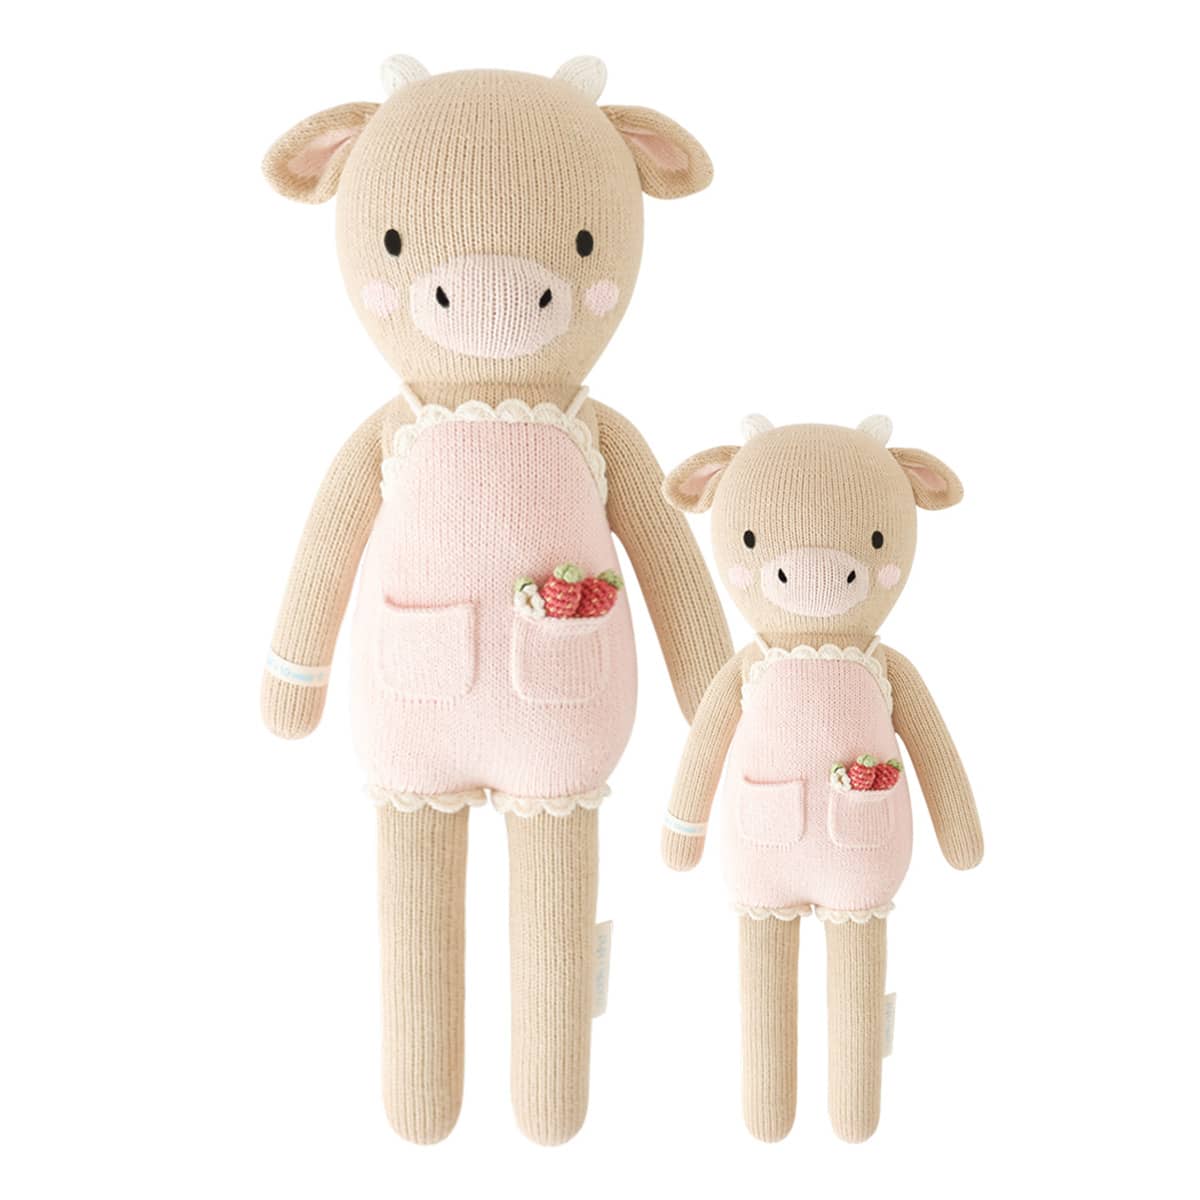 Cuddle + Kind Hand-Knit Doll - Ava the Cow (Powder Pink)